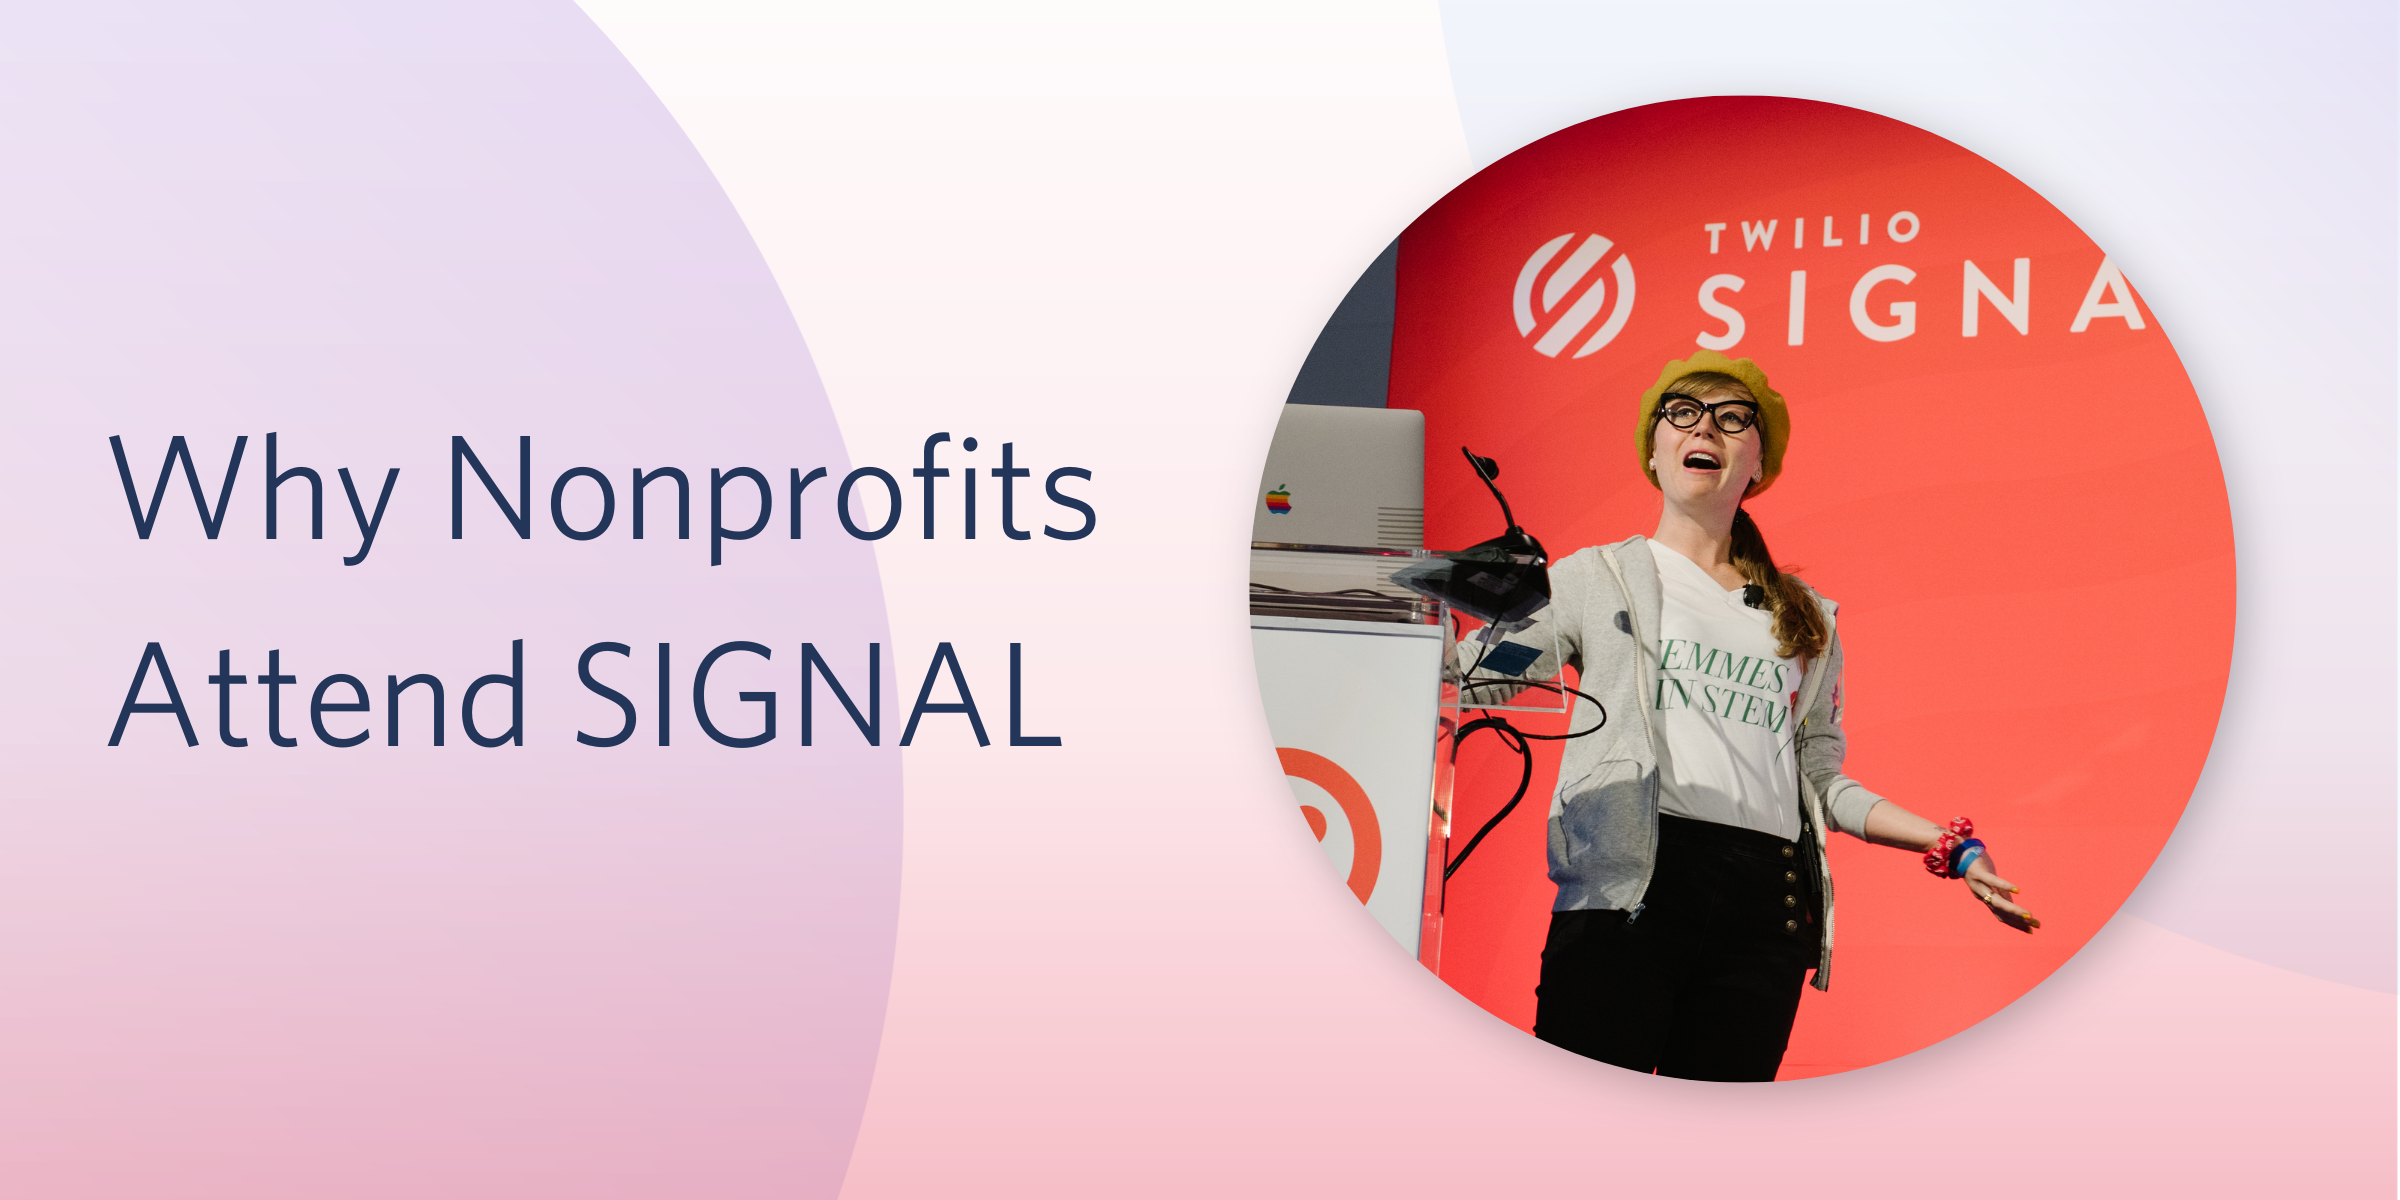 Why Nonprofits Attend SIGNAL